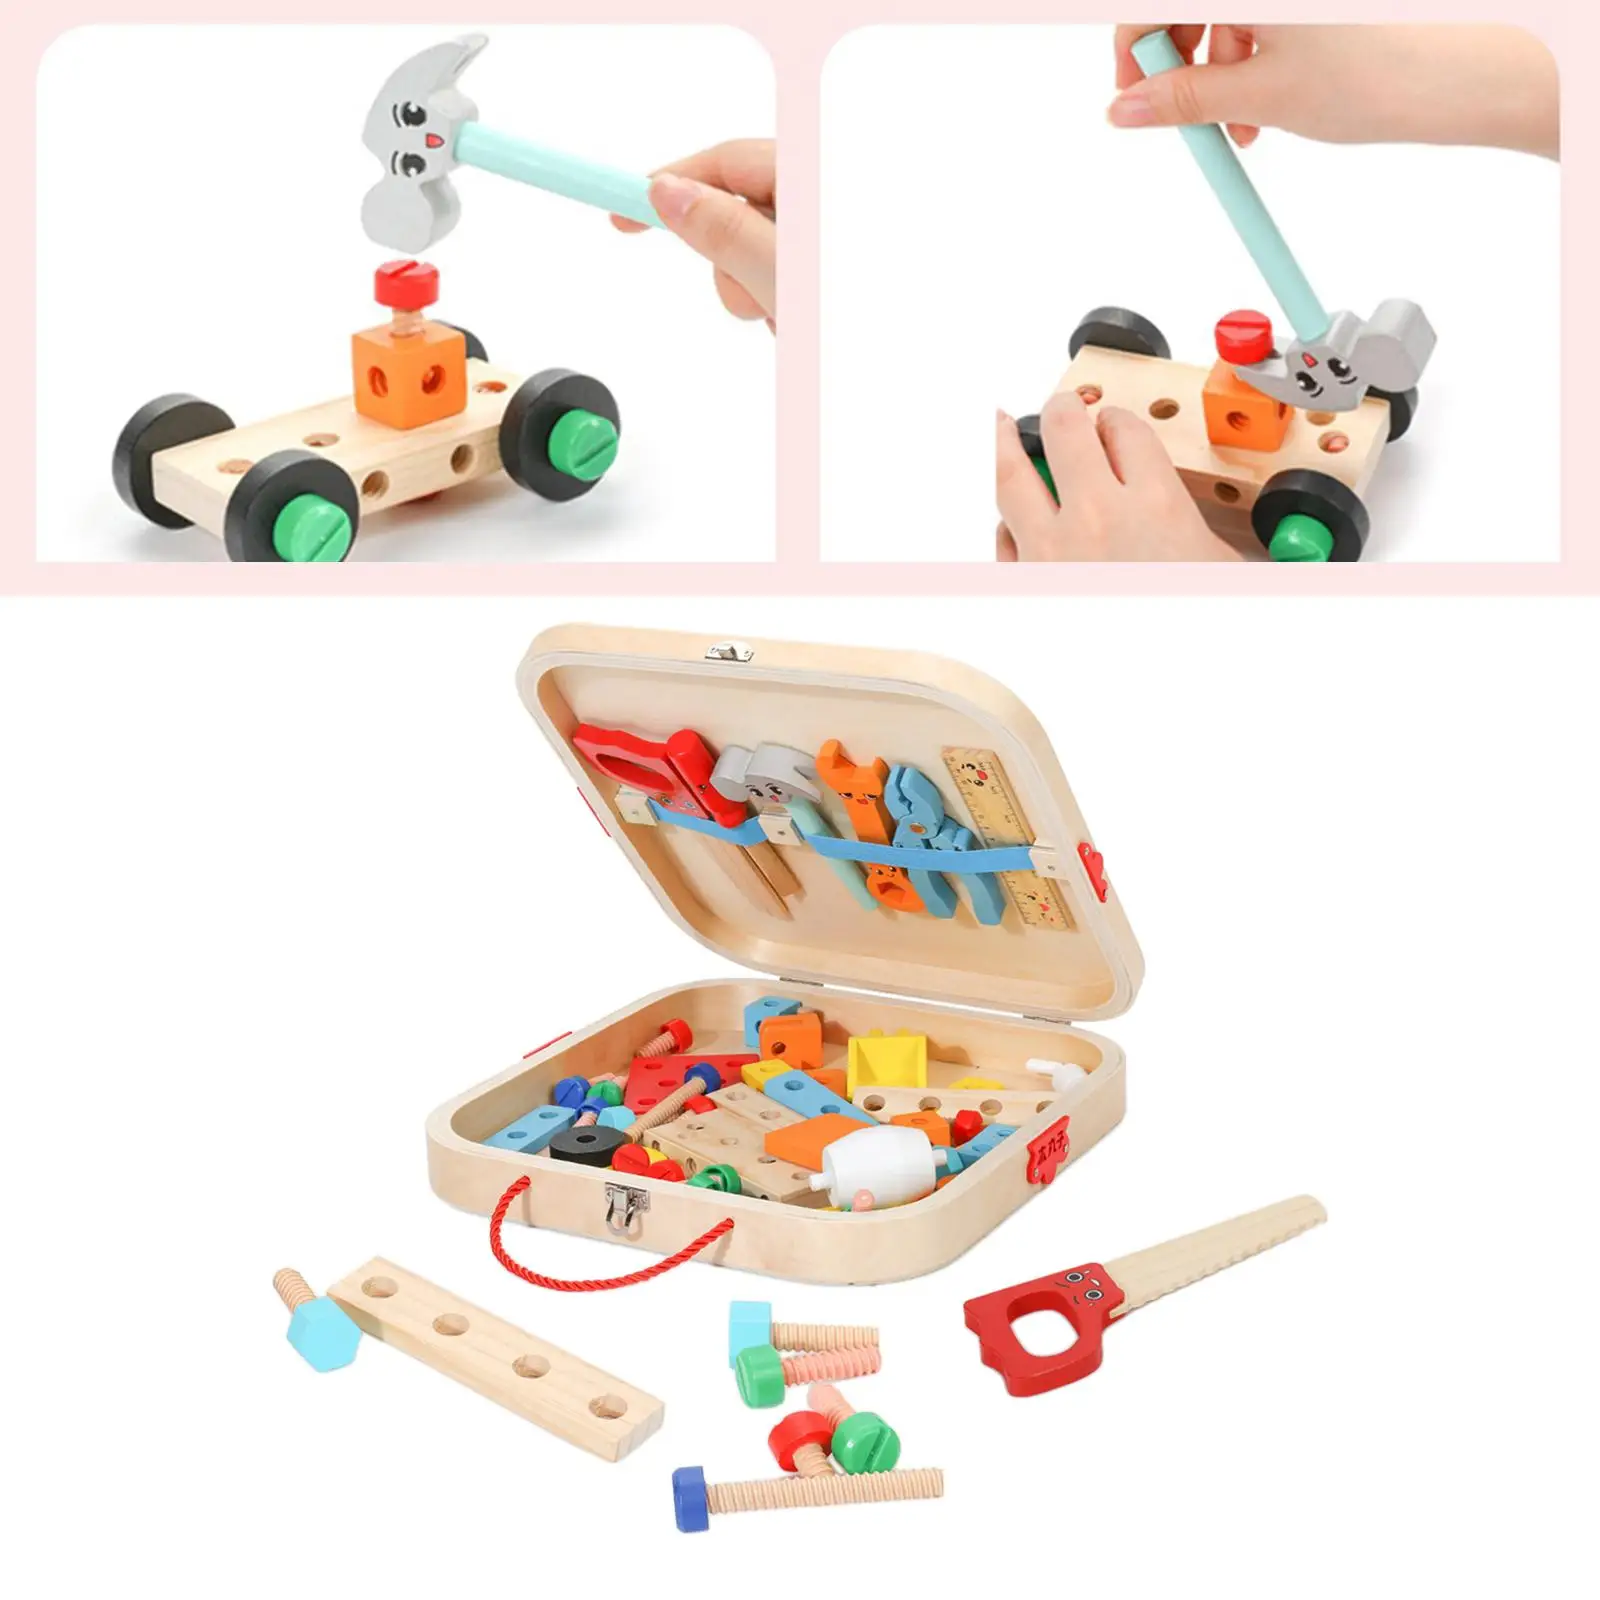 Wooden Kid Tool Set Smooth Wooden Toy Tool Box for Living Room Bedroom DIY